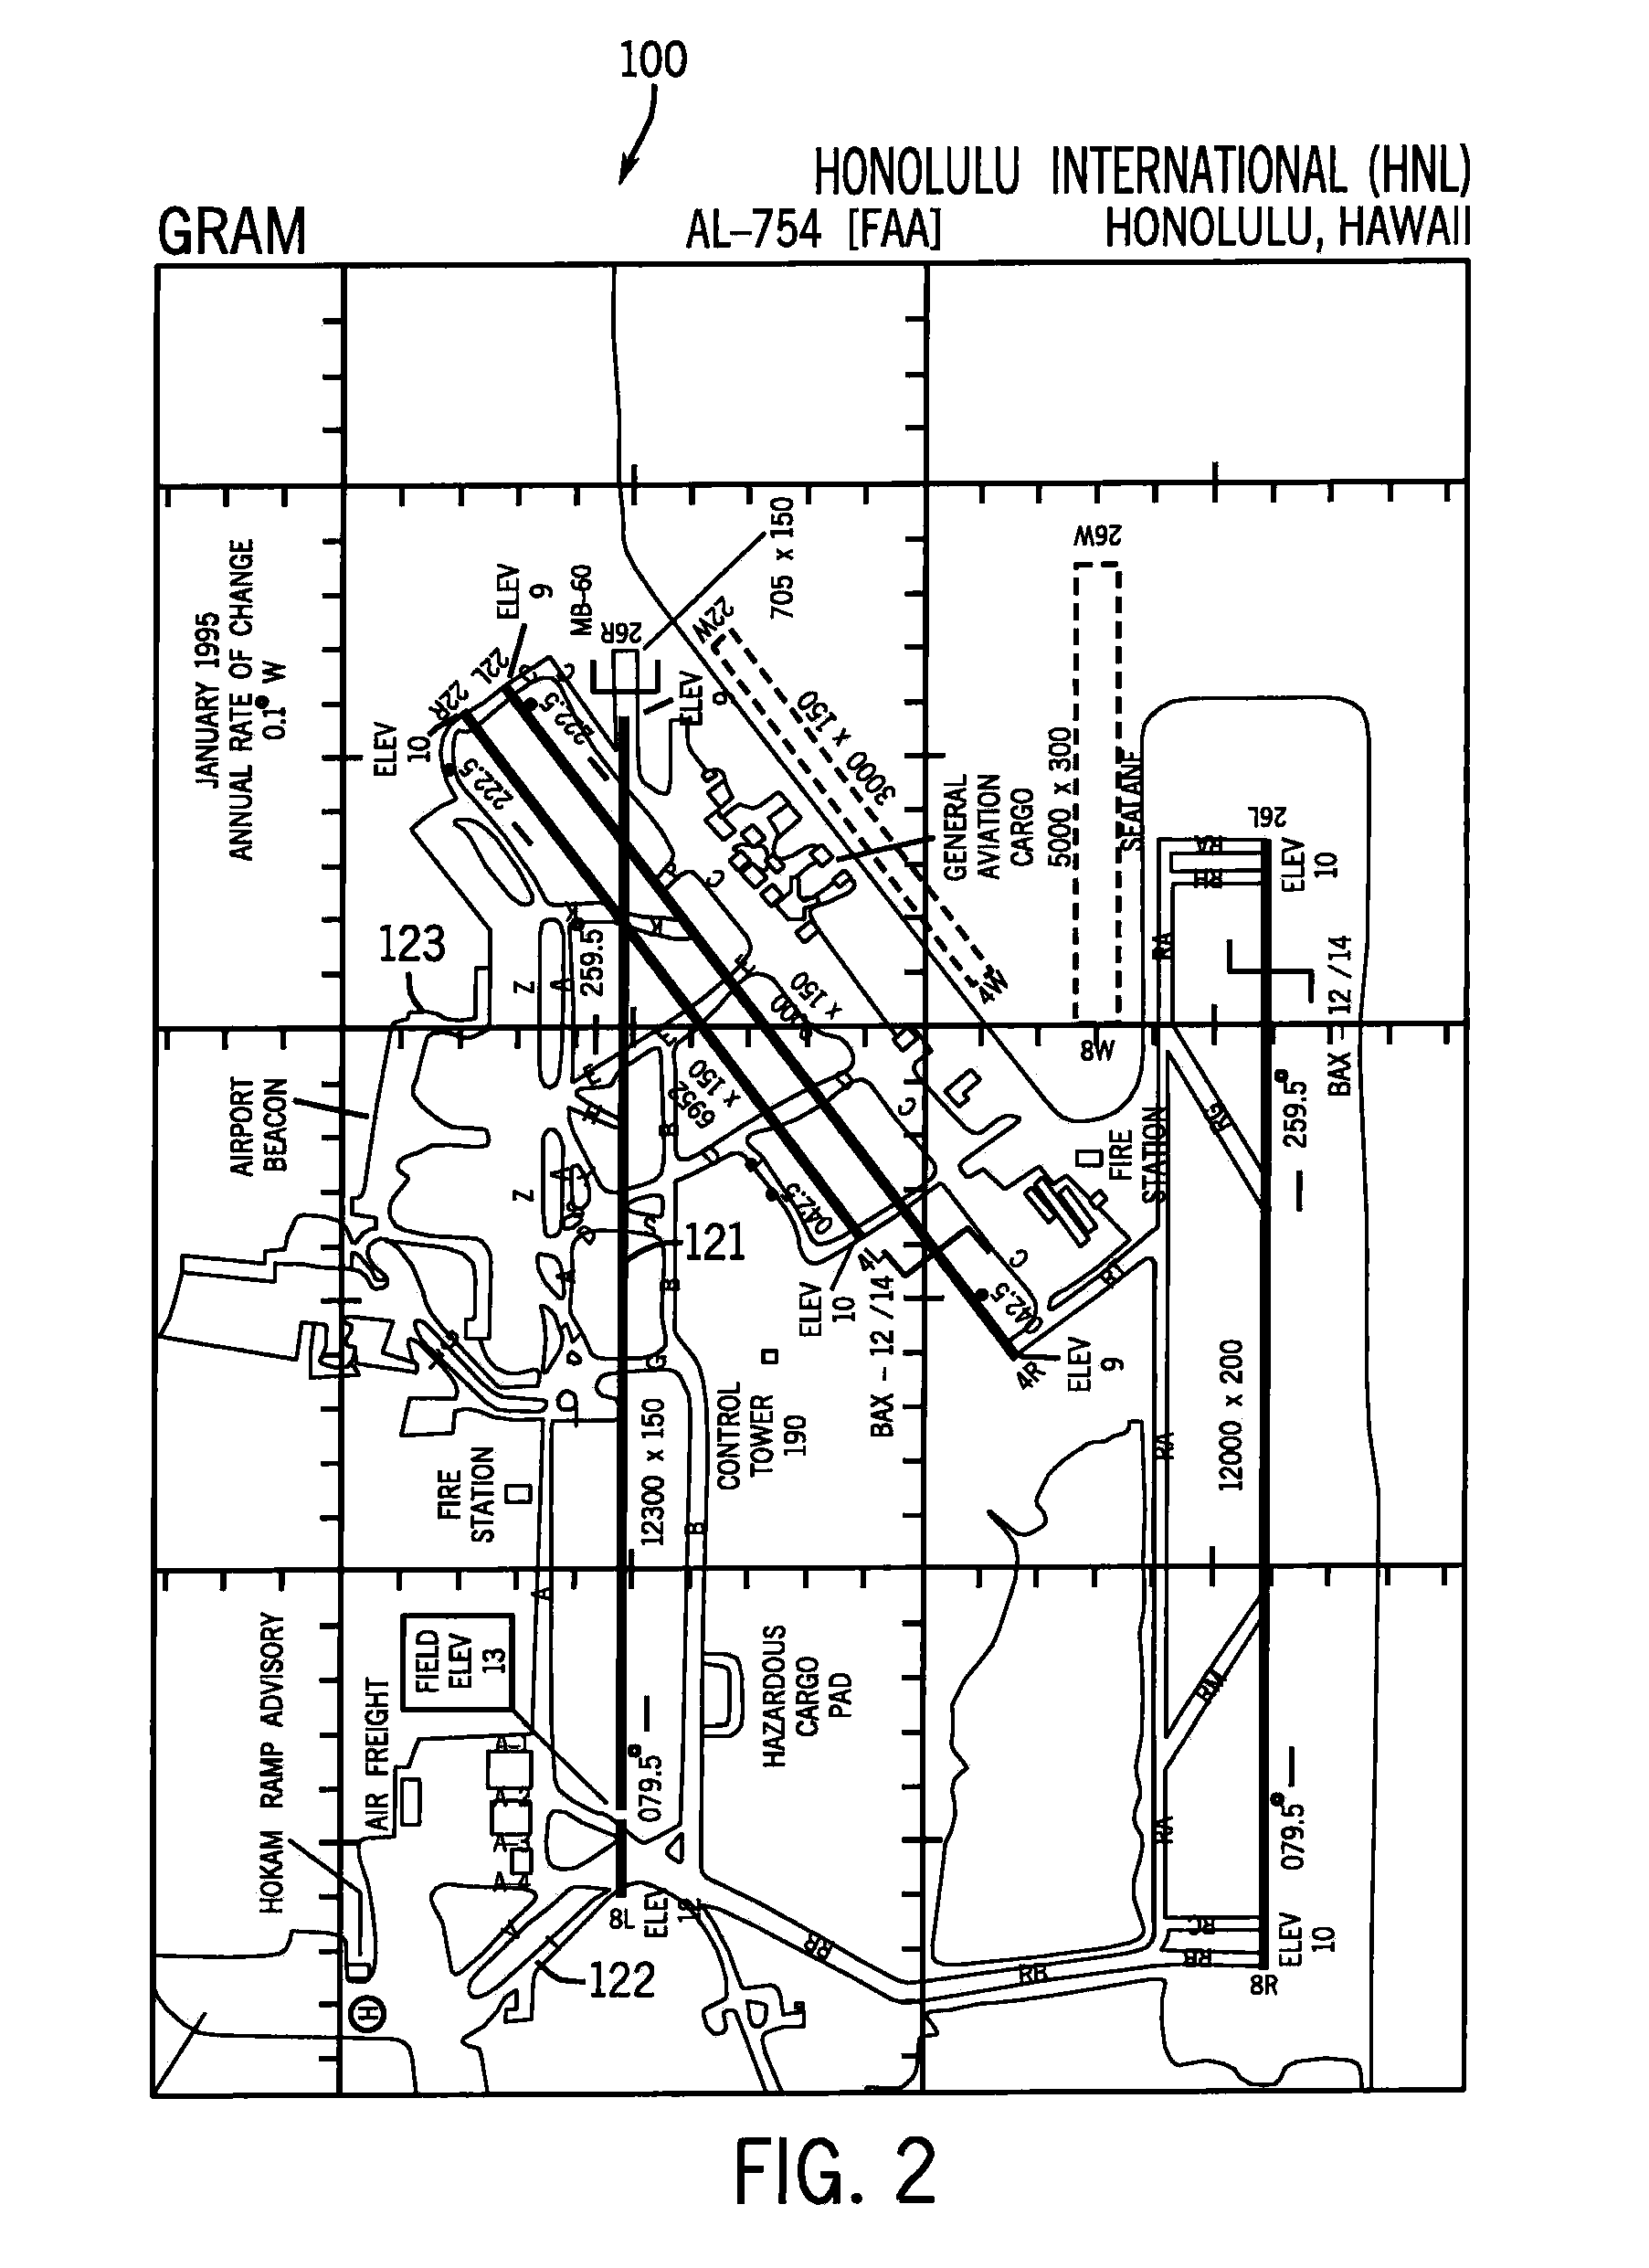 Aircraft-centered ground maneuvering monitoring and alerting system